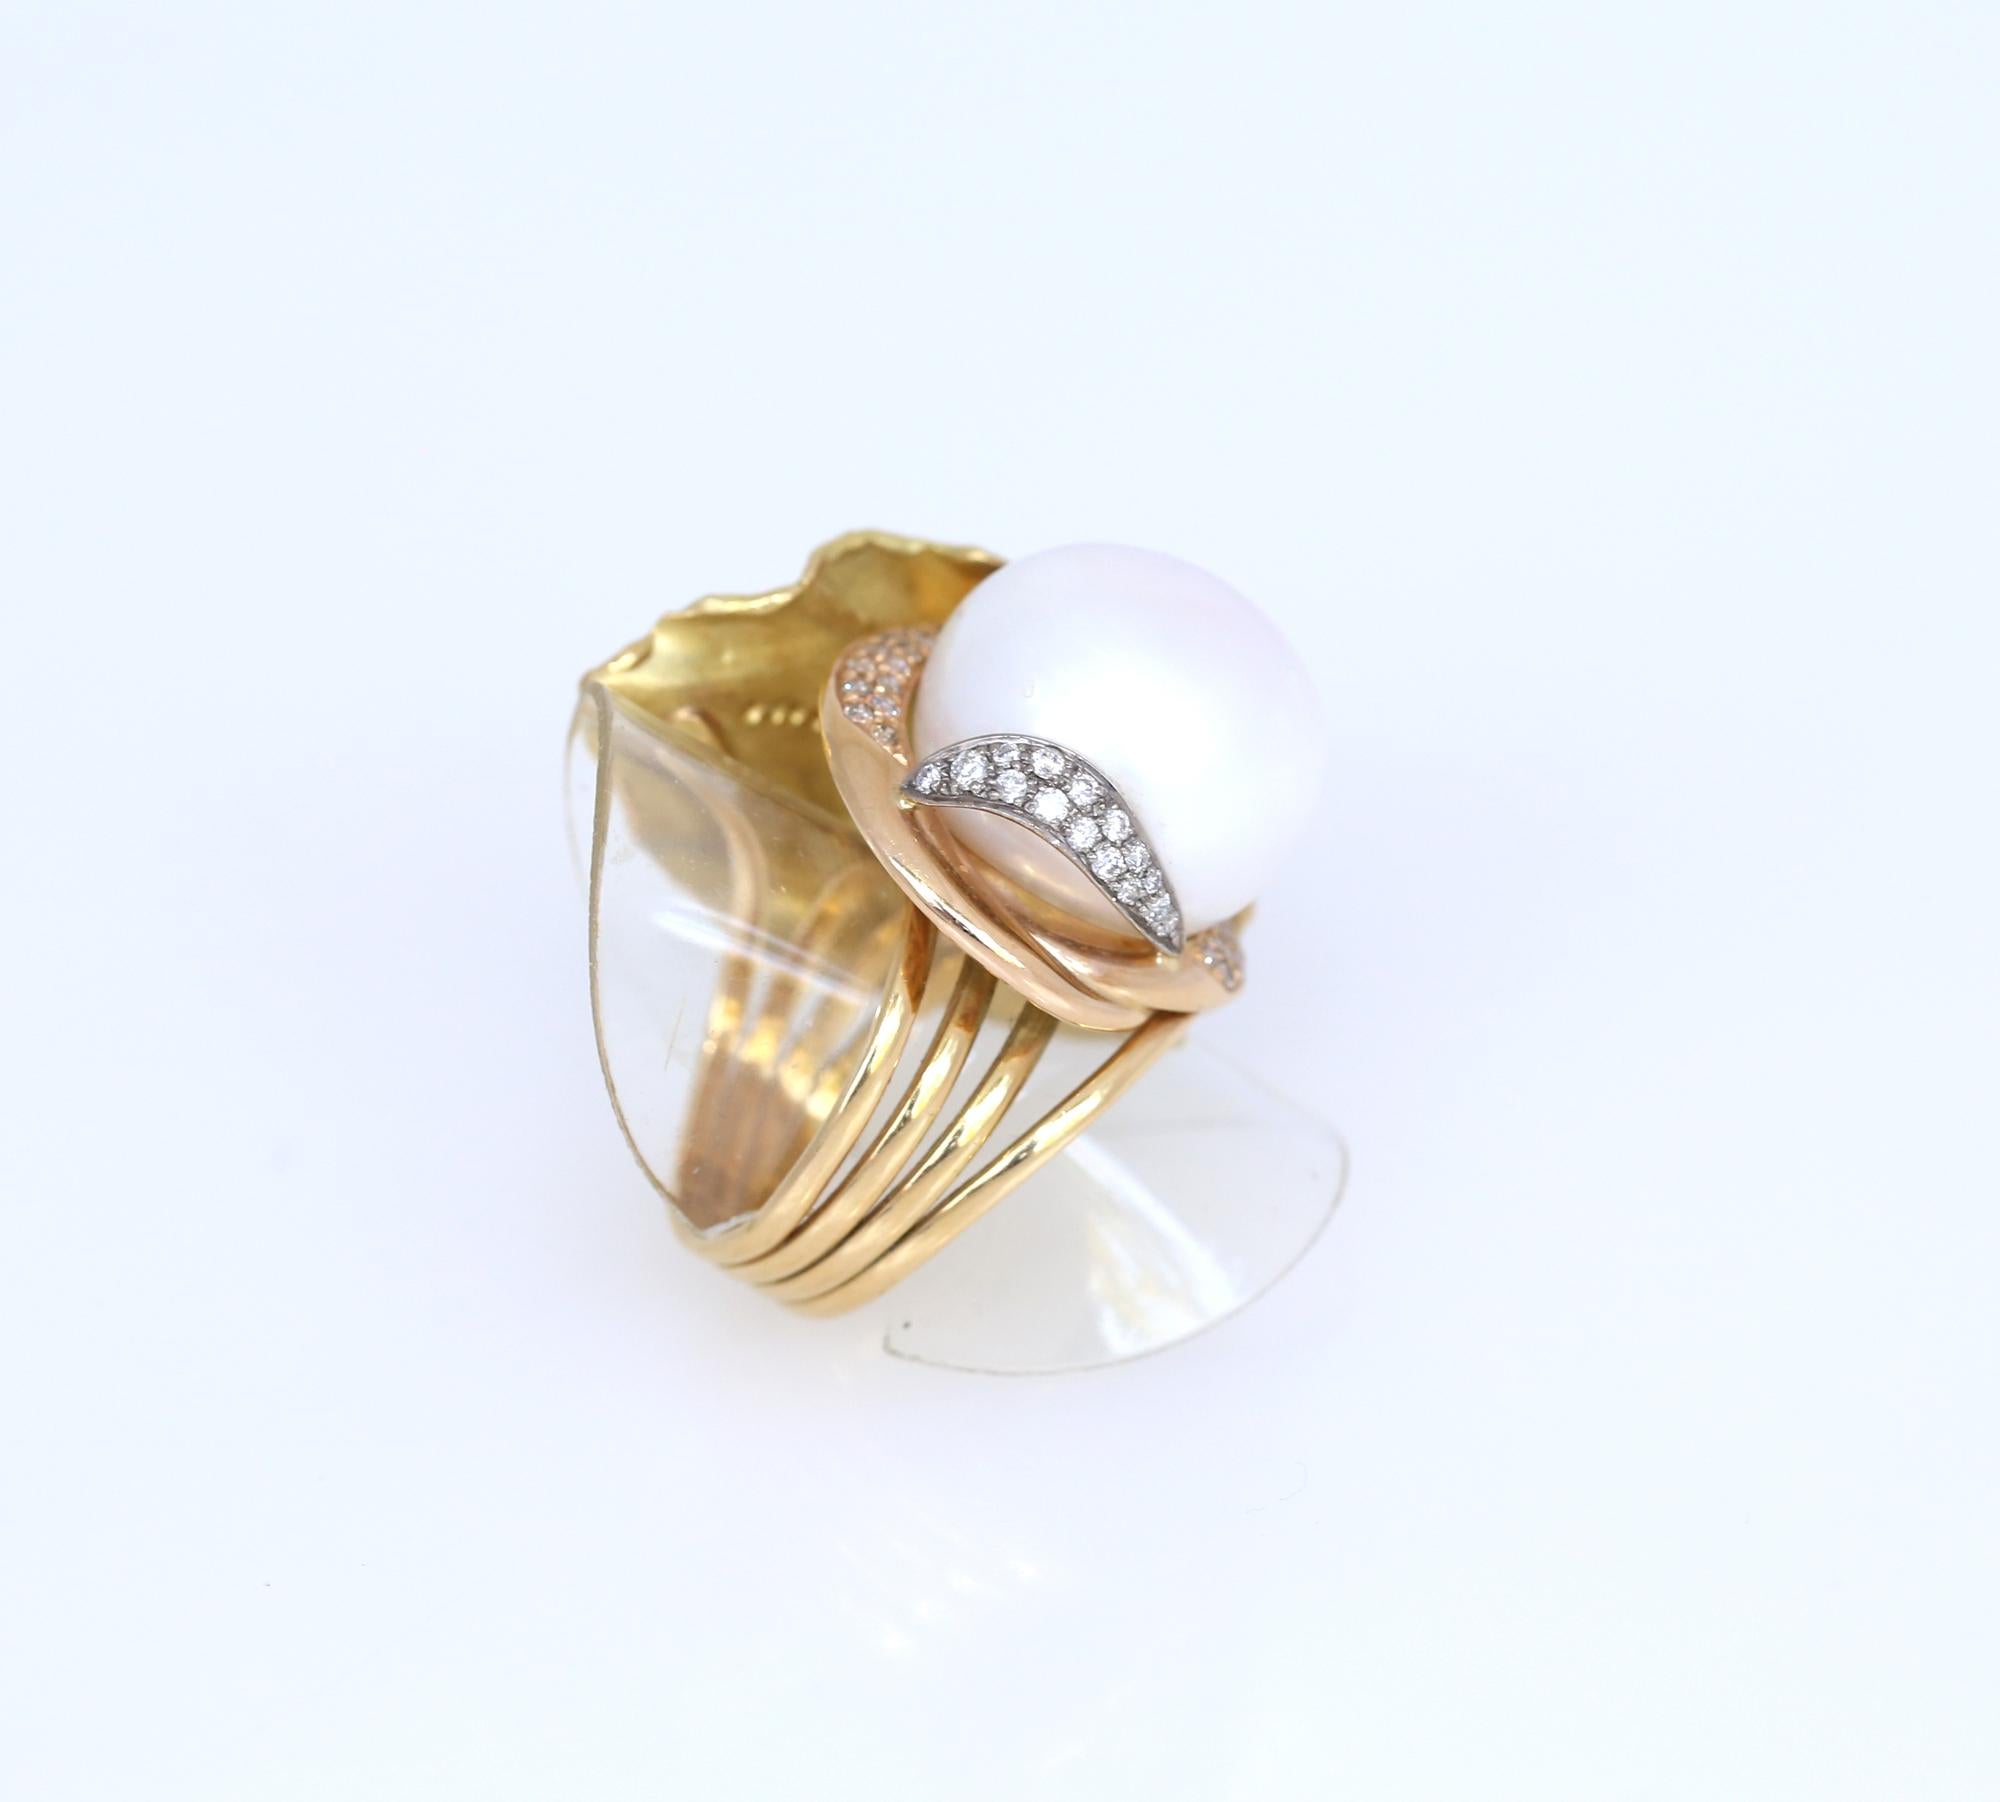 Women's South Sea Pearl Diamonds 18 Karat Yellow Gold Floral Ring, 1970 For Sale